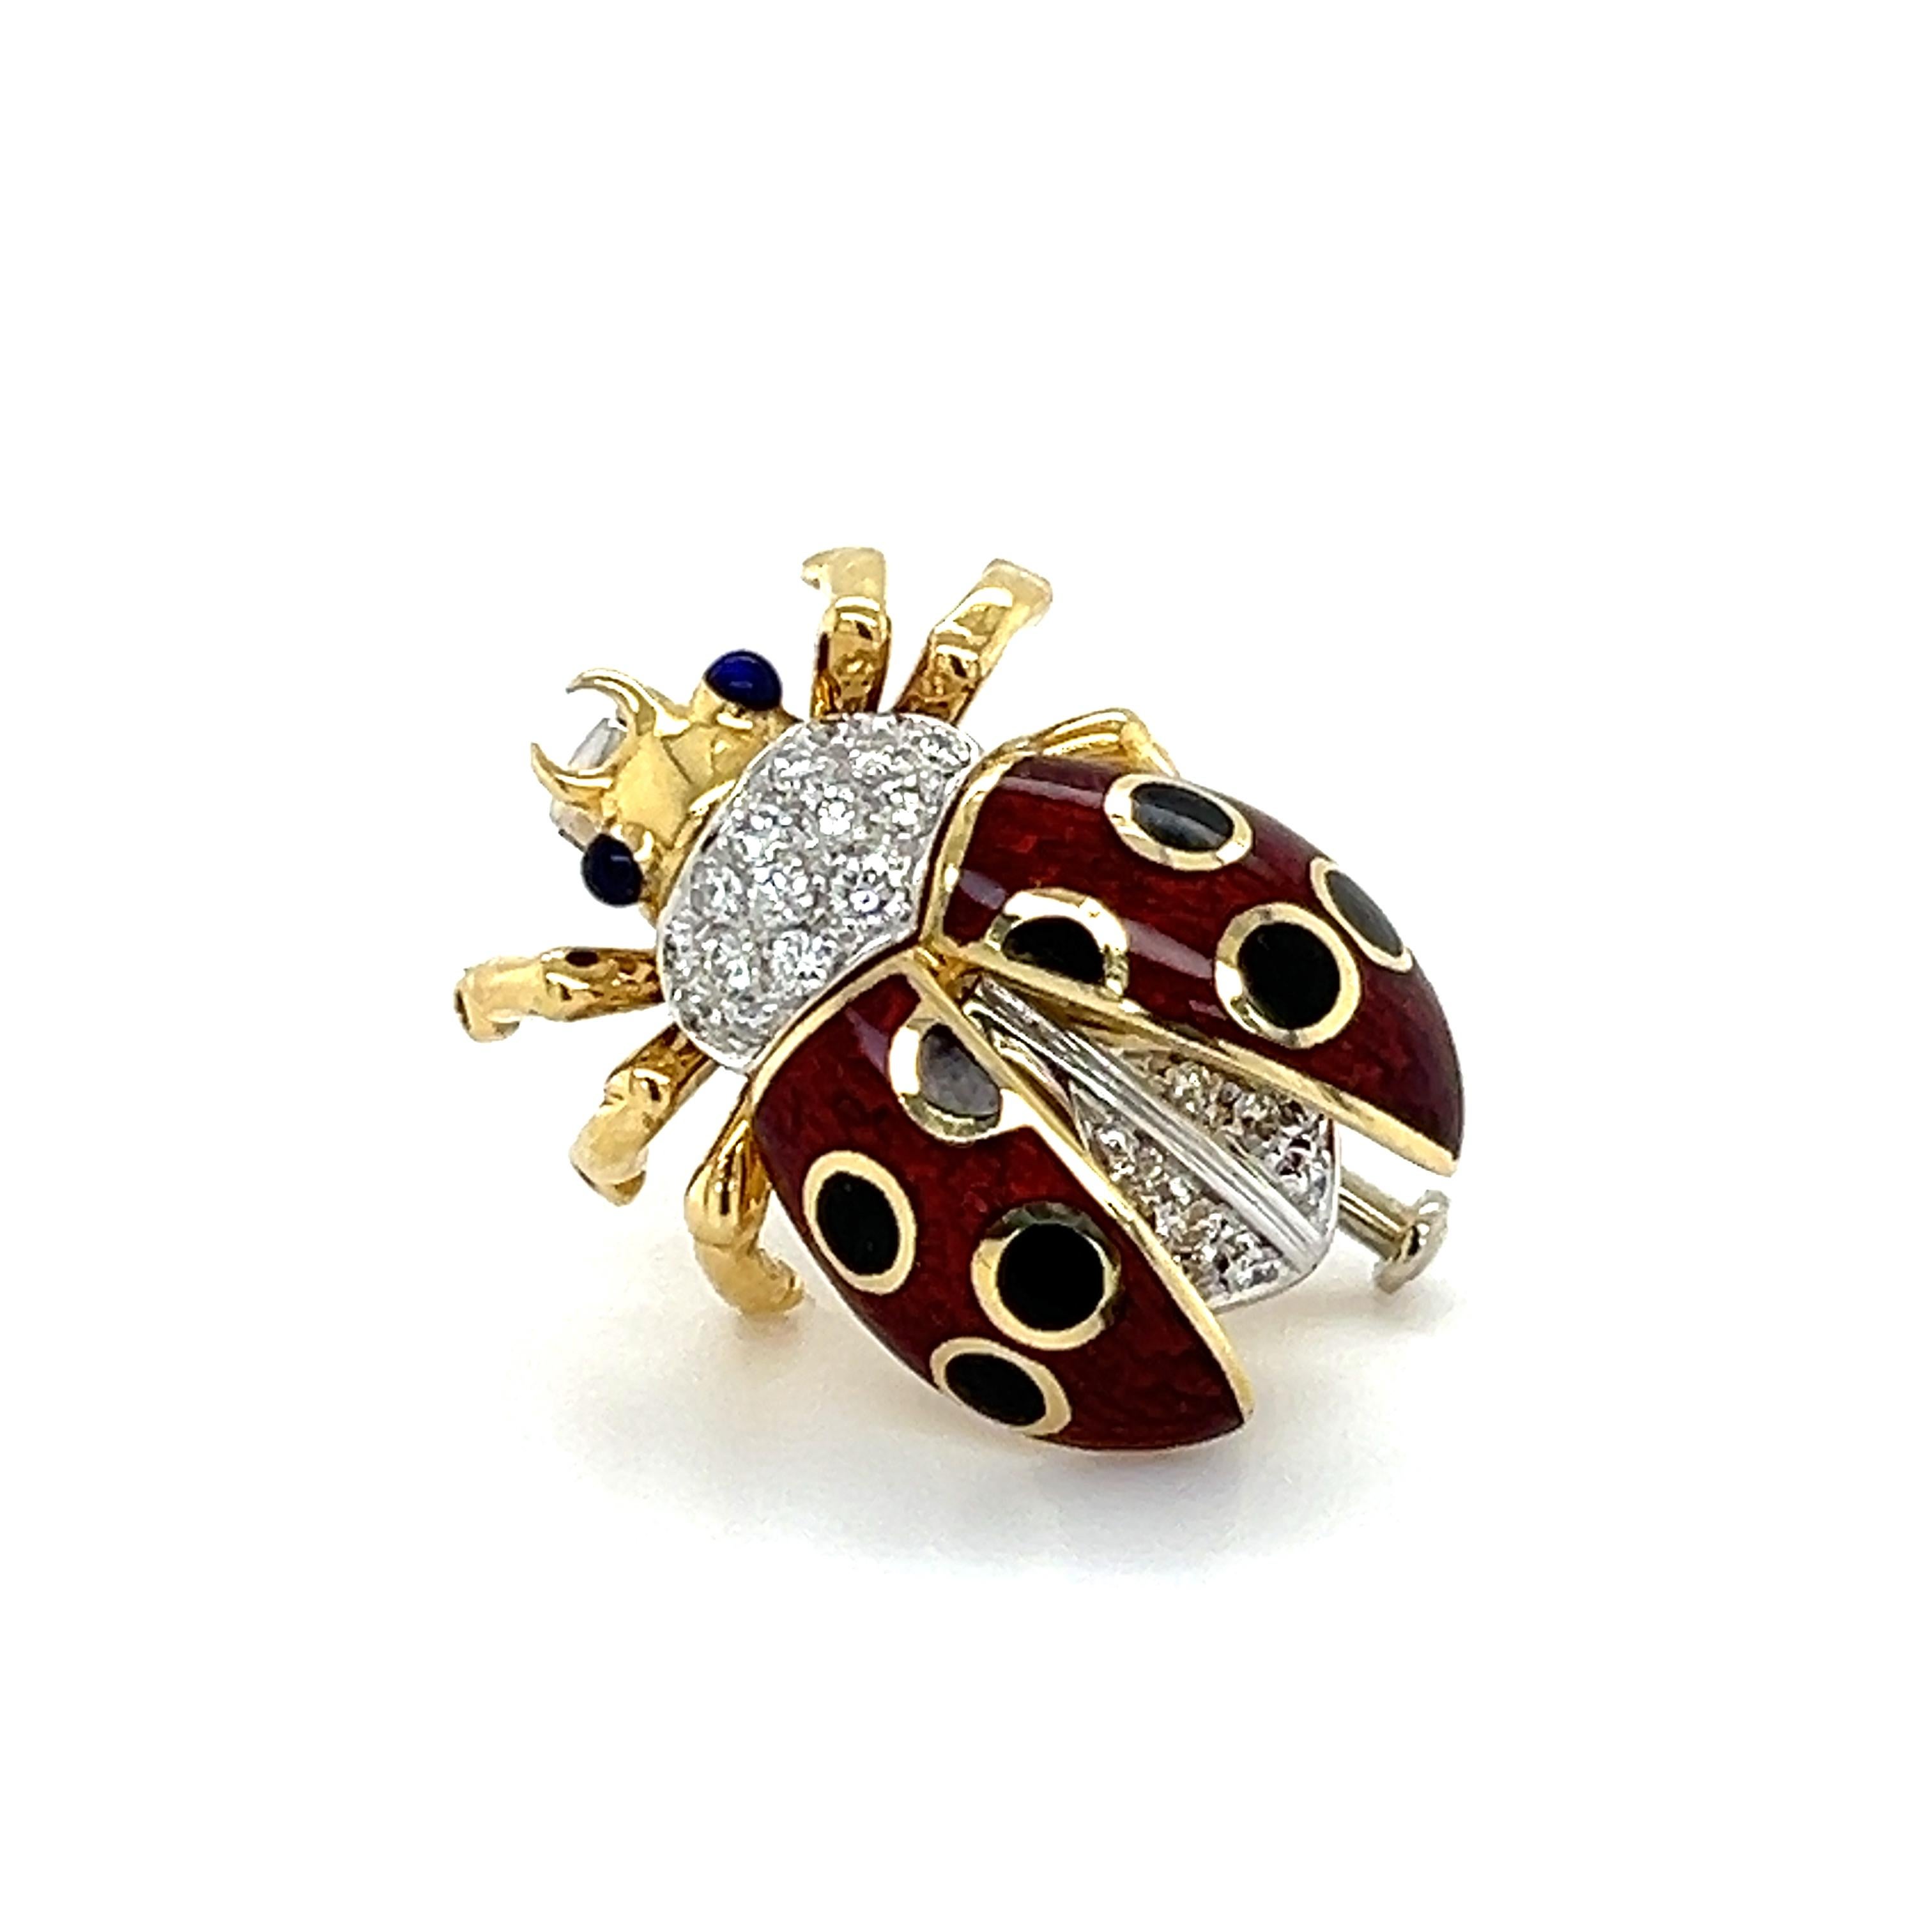 Beautiful design from famed designer Tiffany & Co. The brooch depicts a gorgoues lady bug encrusted with natural round brilliant cut diamonds. Known as a symbol of luck and good fortune the lady bug has been a favorite of jewelers throughout the